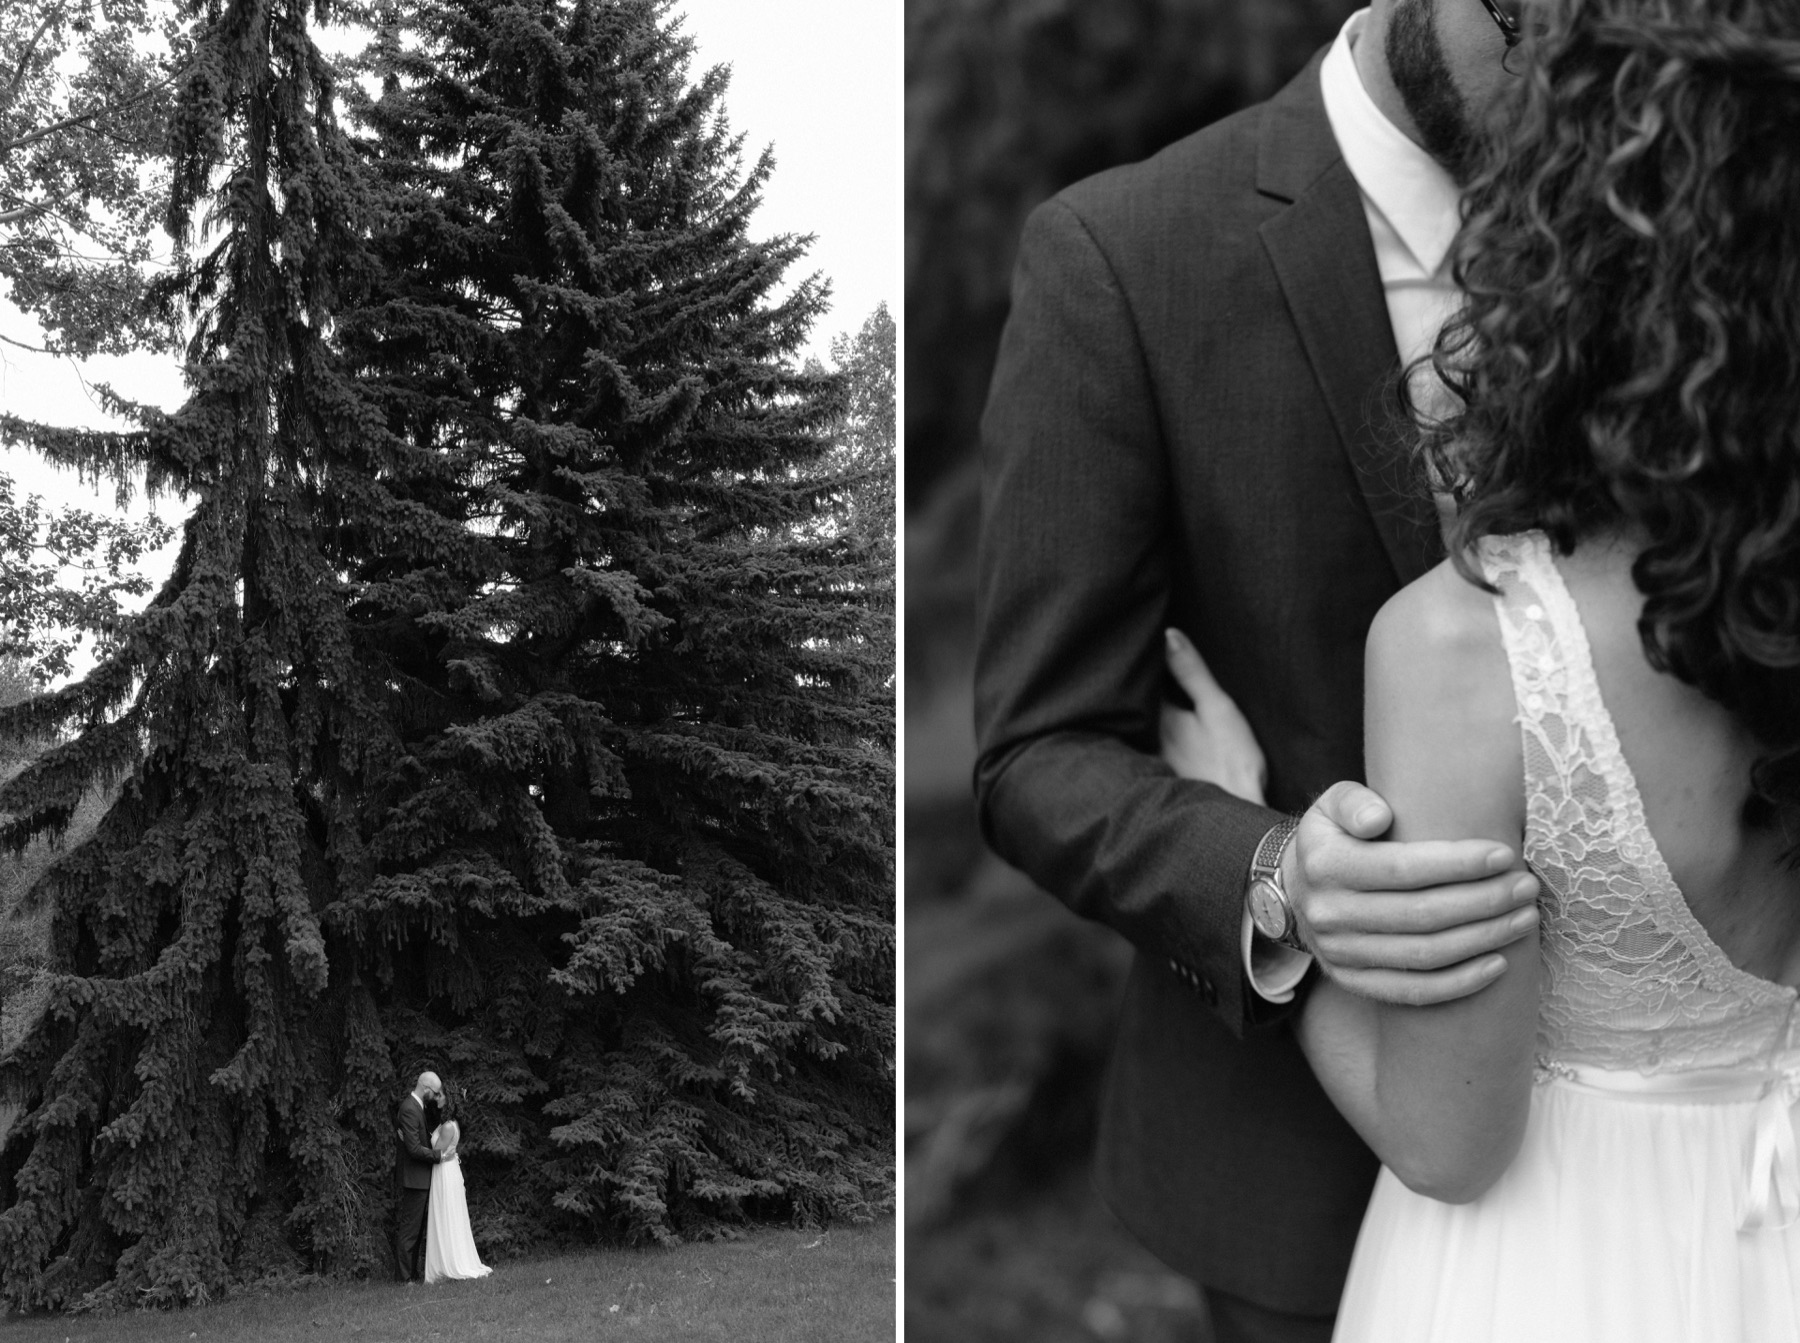 Wedding portraits in Calgary's Conderation Park in the northwest of the city